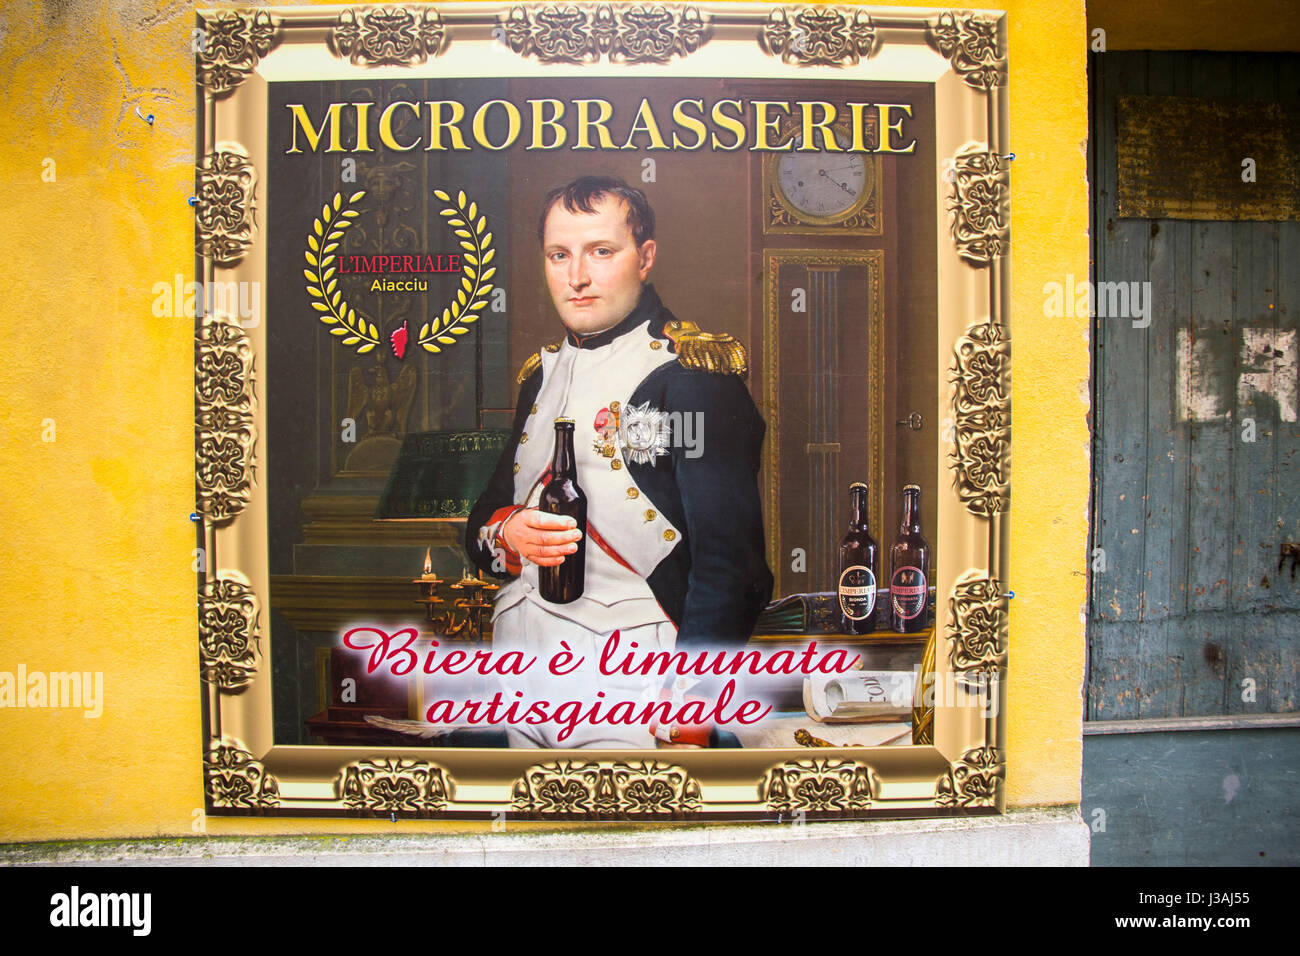 A micro-brewery adjacent Maison Bonaparte (Napoleon's ancestral home) features a poster of the self-proclaimed Emperor of France.  Ajaccio, Corsica. Stock Photo